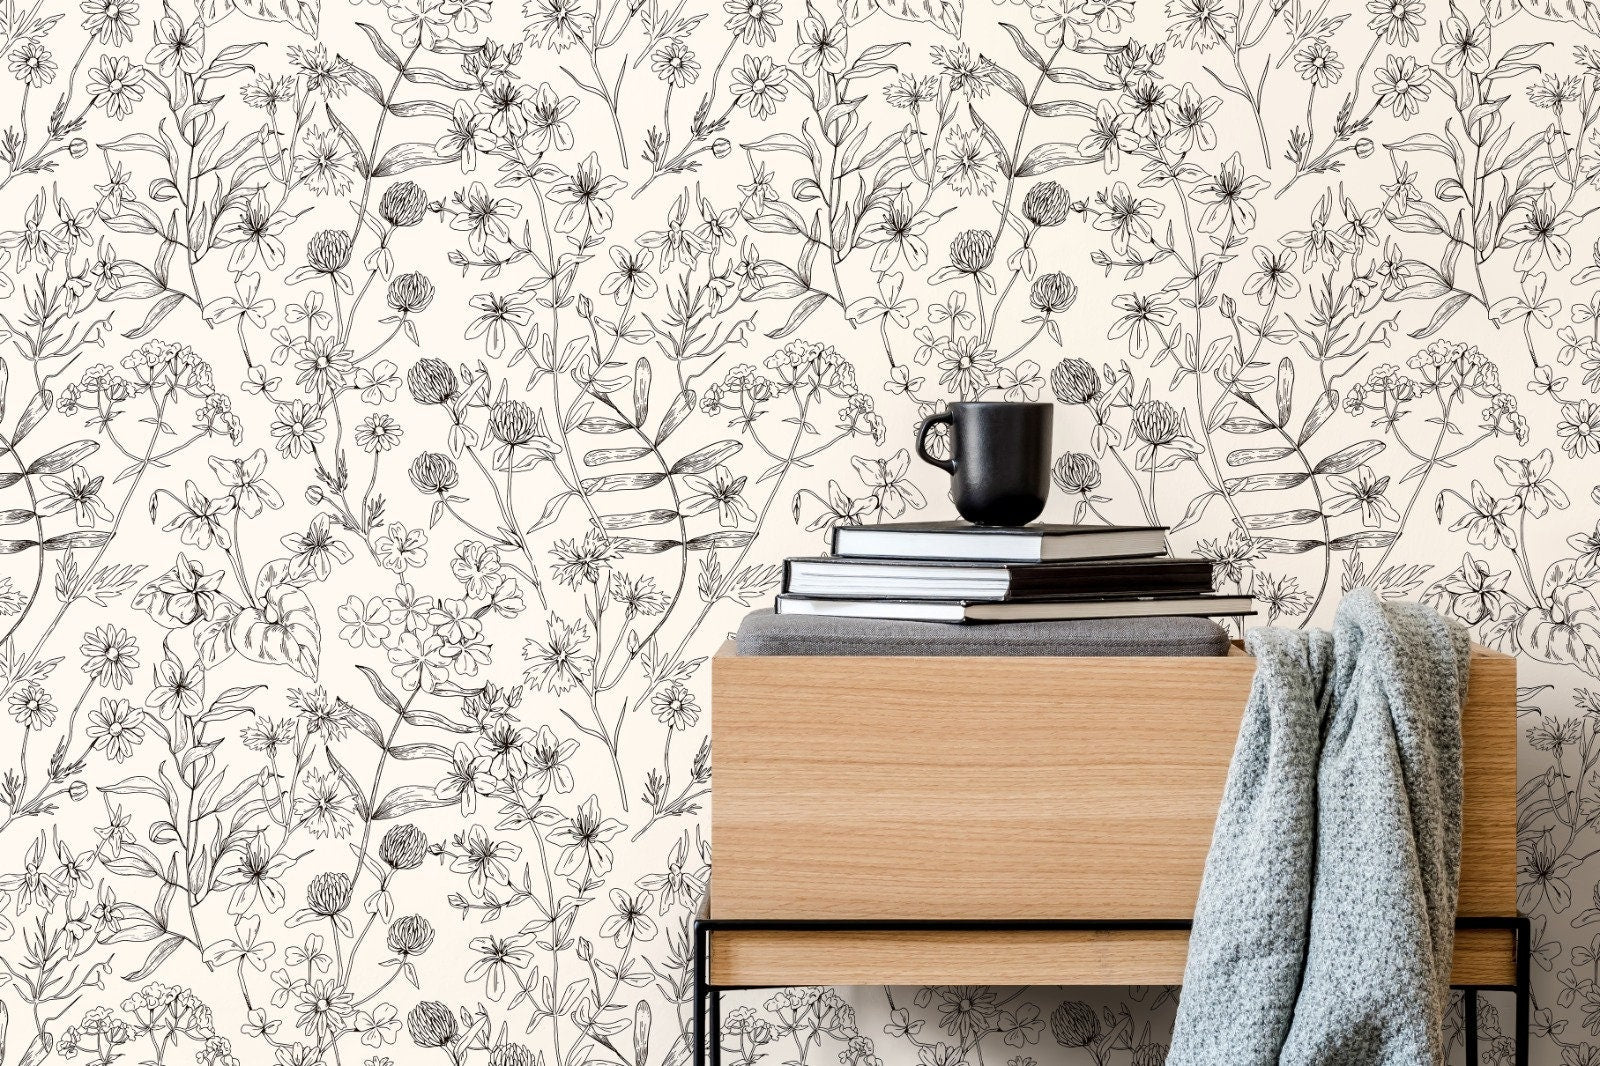 Black and White Wildflowers Wallpaper / Peel and Stick Wallpaper Removable Wallpaper Home Decor Wall Art Wall Decor Room Decor - D306